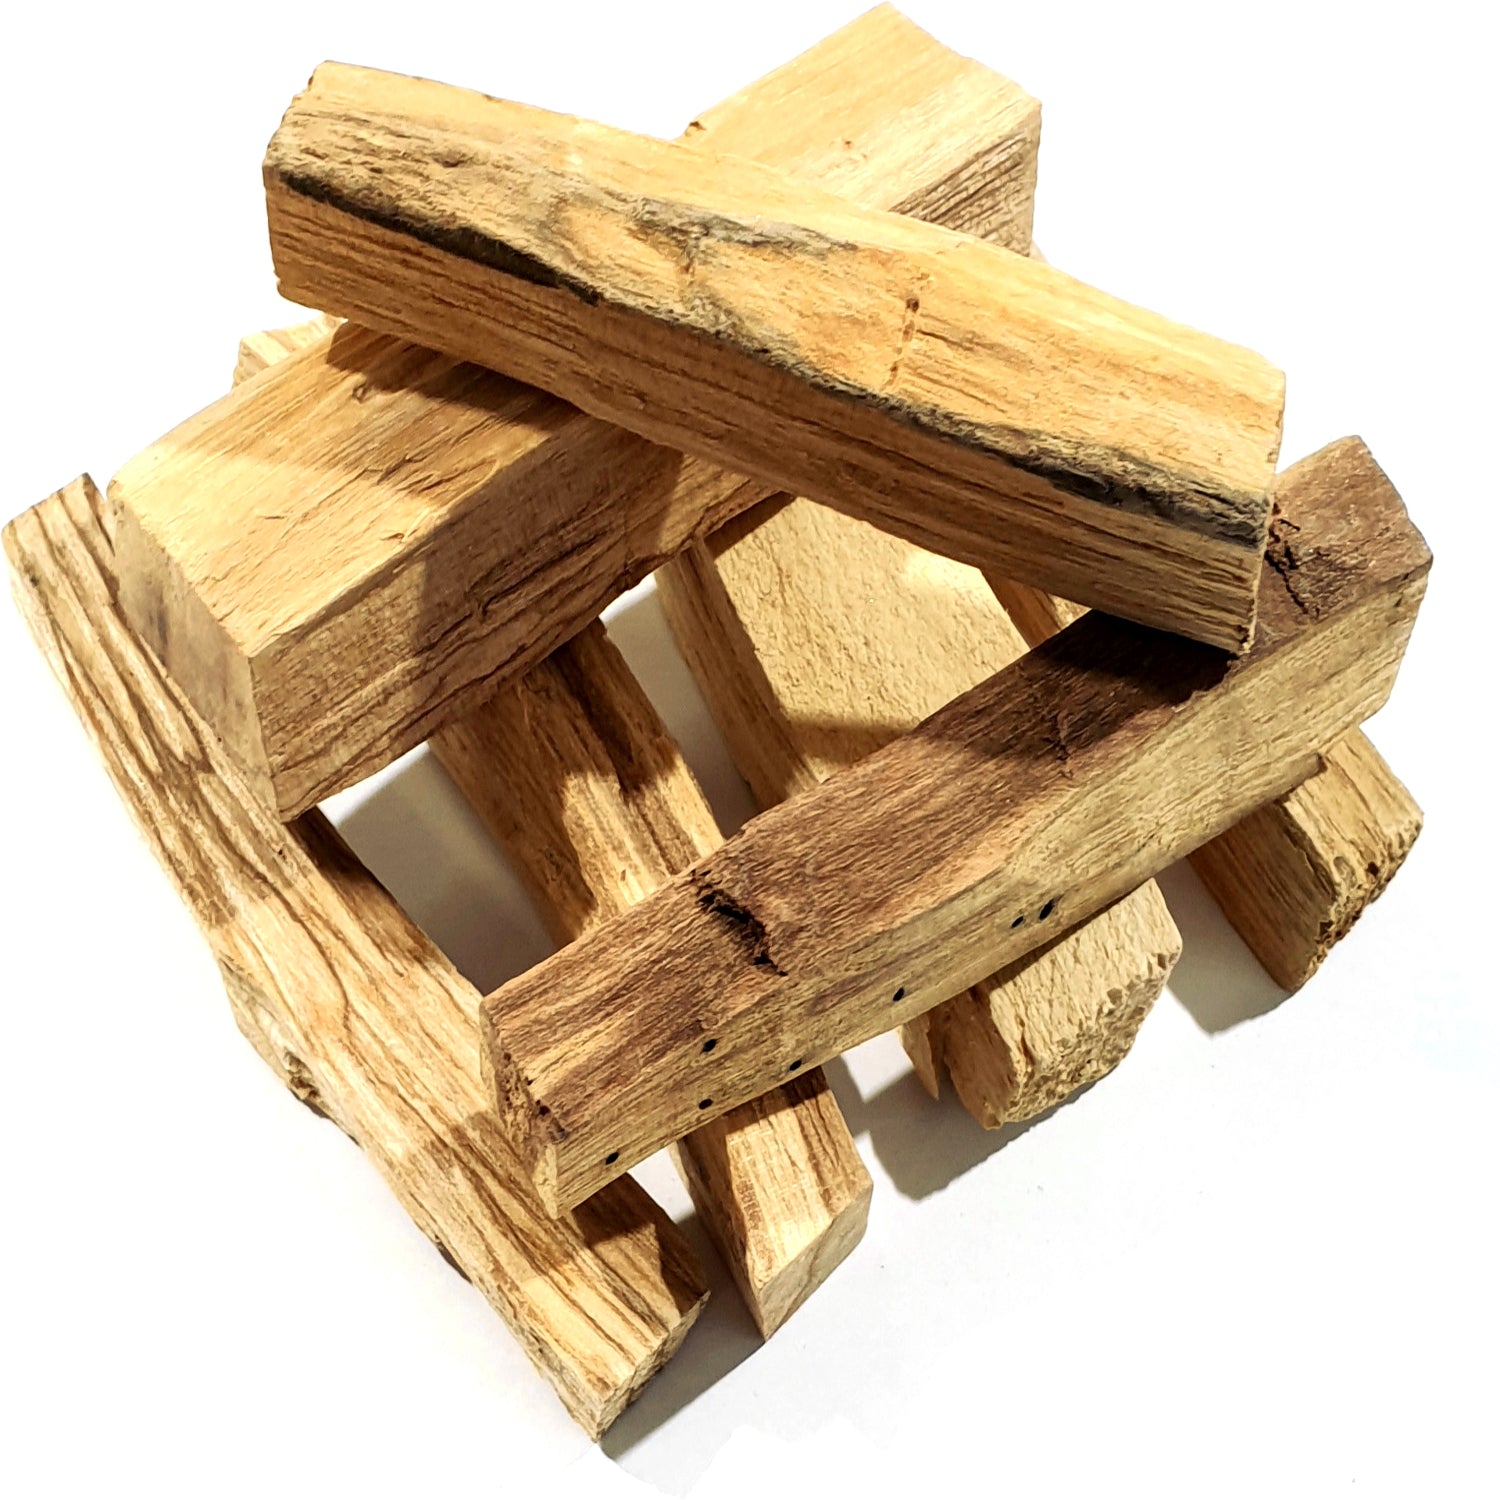 Palo Santo is great to use if you feel you have been cursed, rub this herb on your body and then bathe. Burn to promote positivity. 